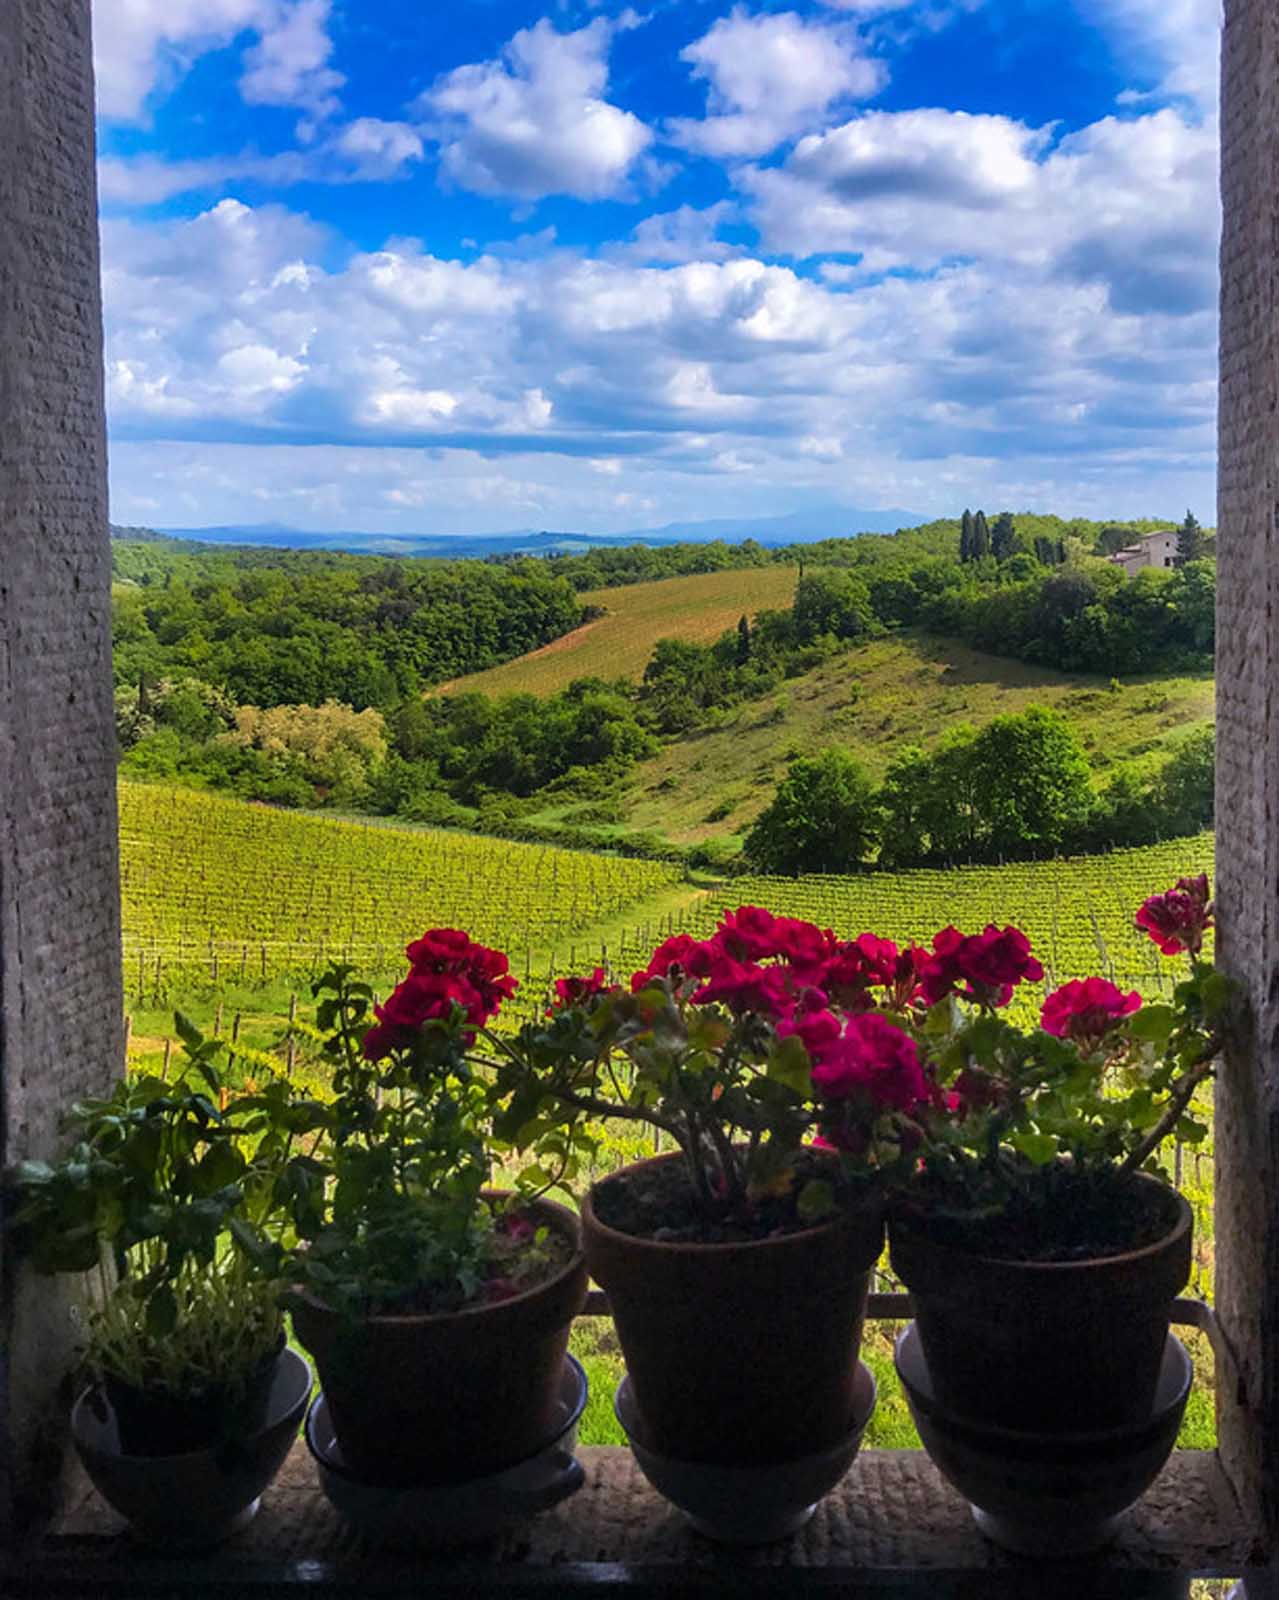 flowers looking over vineyard in tuscany